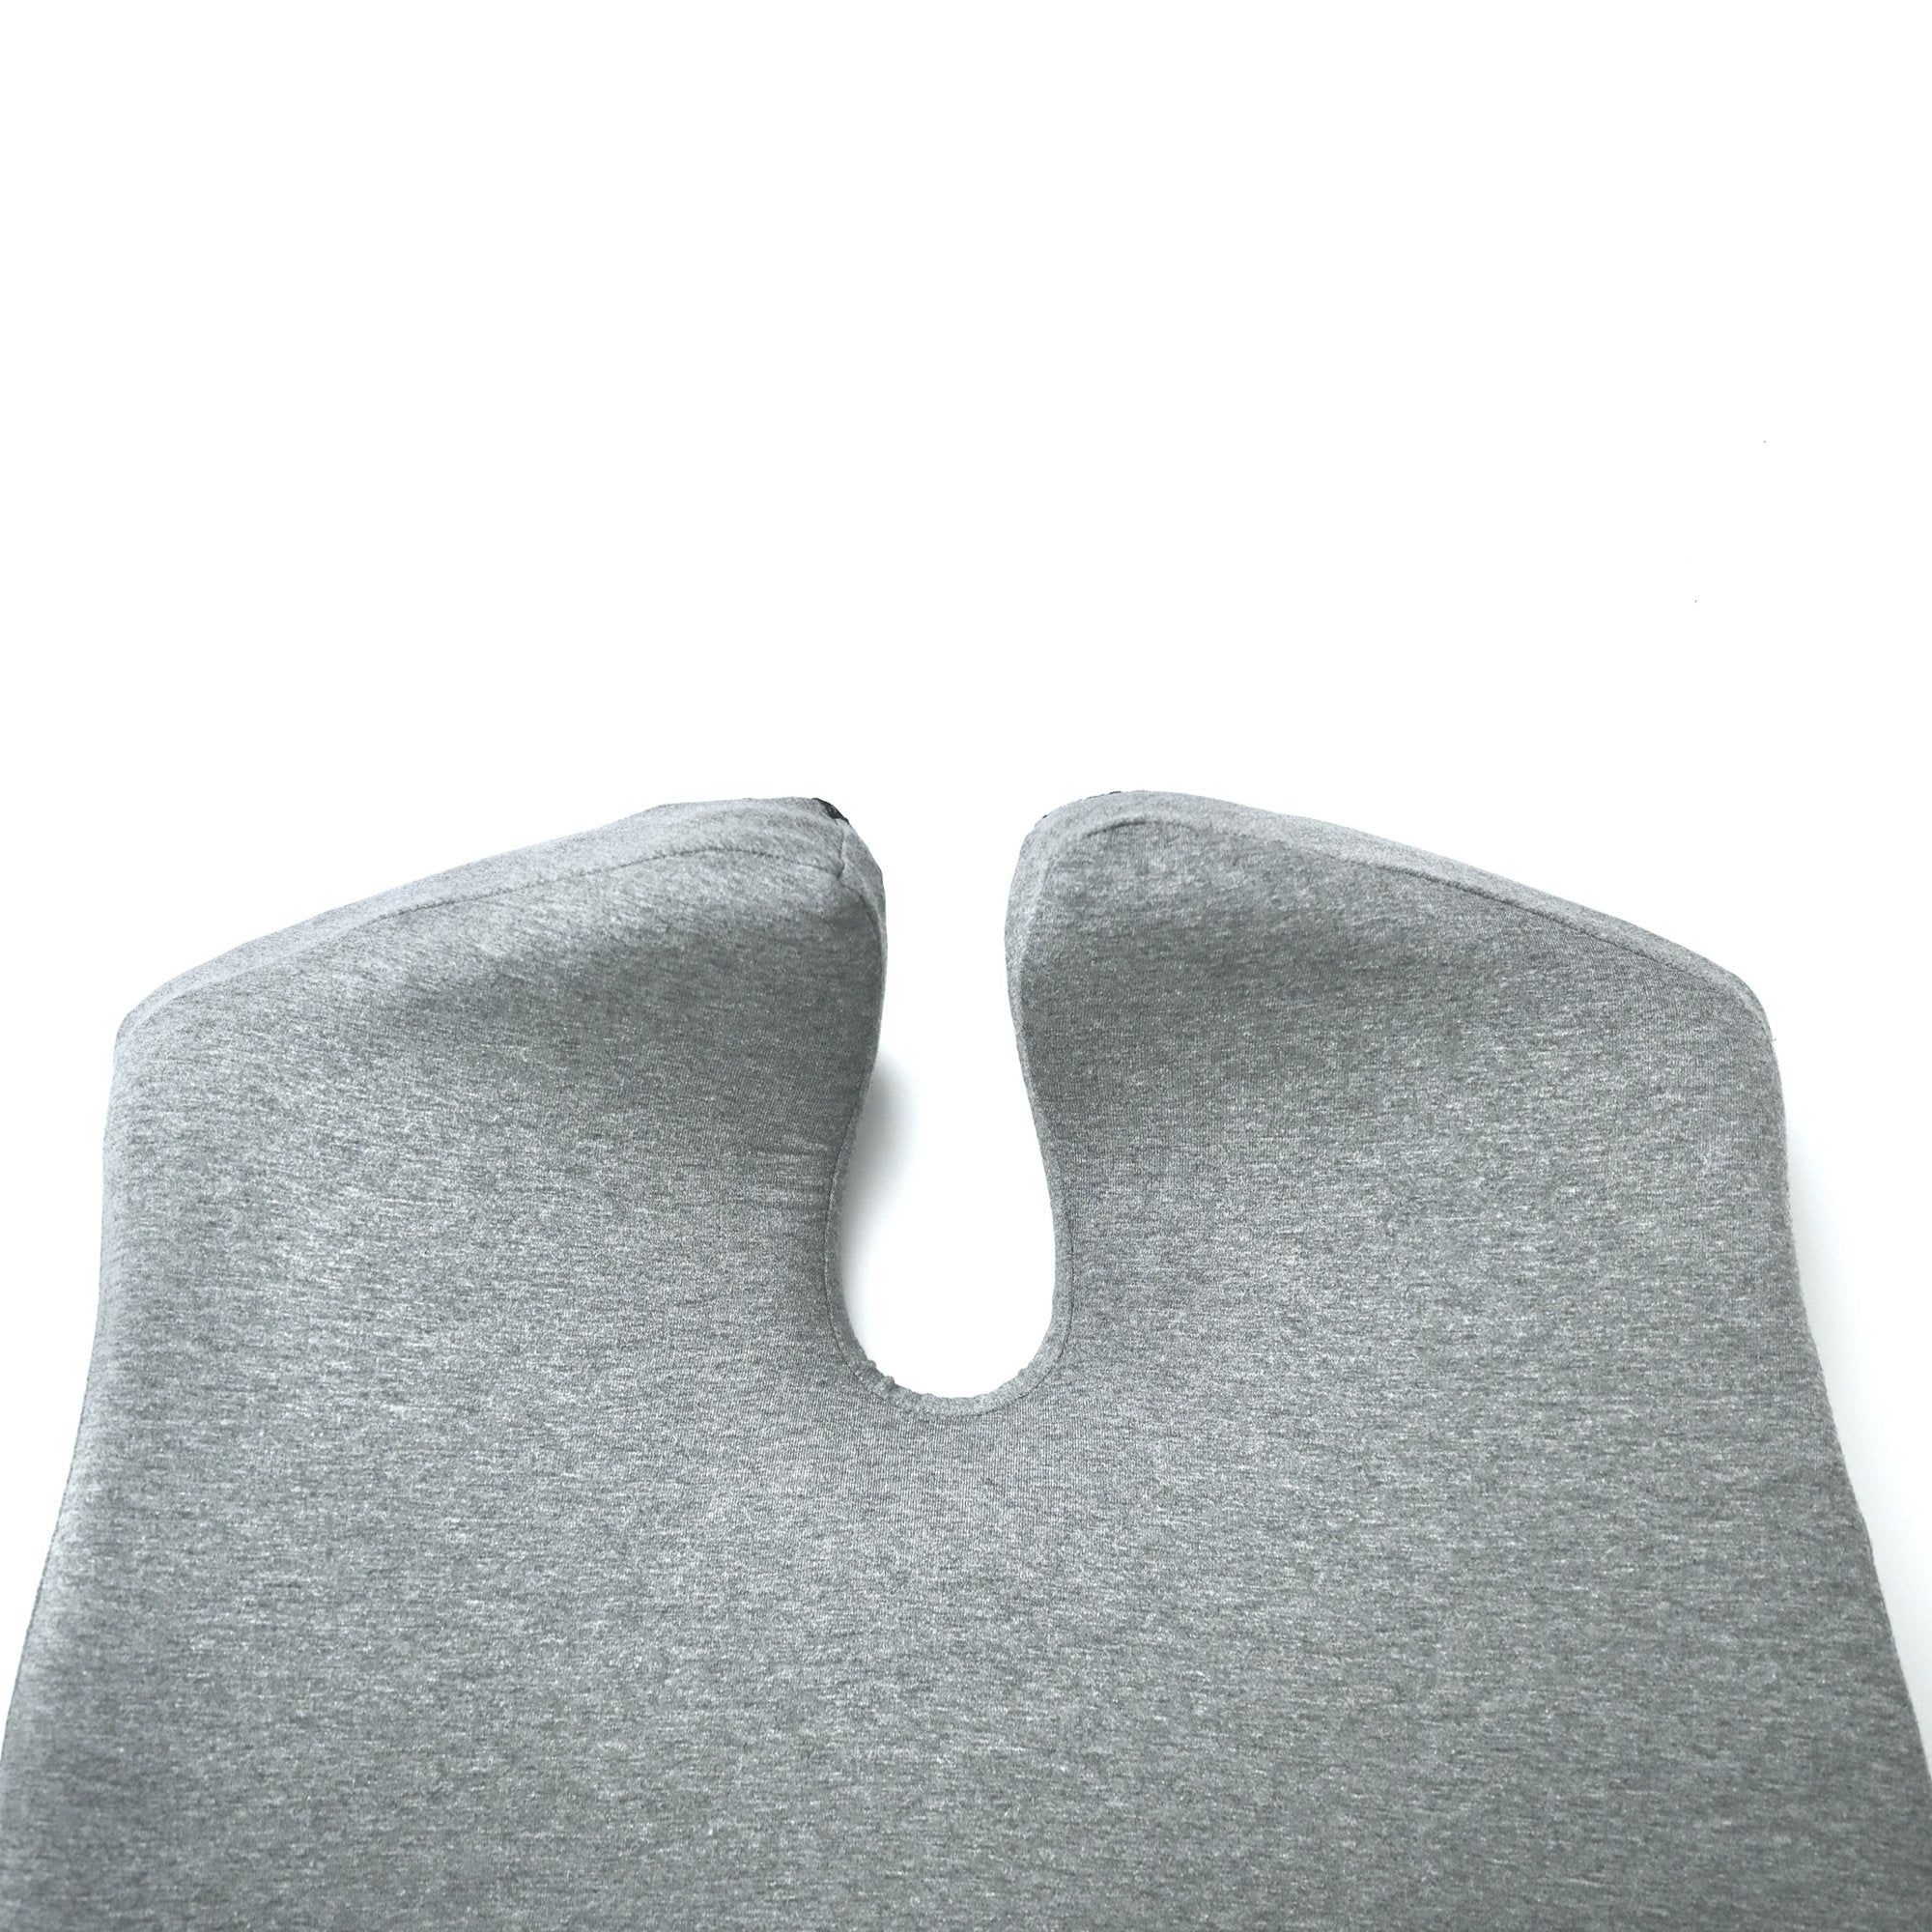 Cushion Lab Patented Pressure Relief Seat Cushion for Long Sitting Hours on  Office/Home Chair, Car, Wheelchair - Extra-Dense Memory Foam for Hip,  Tailbone, Coccyx, Sciatica - Light Grey - Matthews Auctioneers